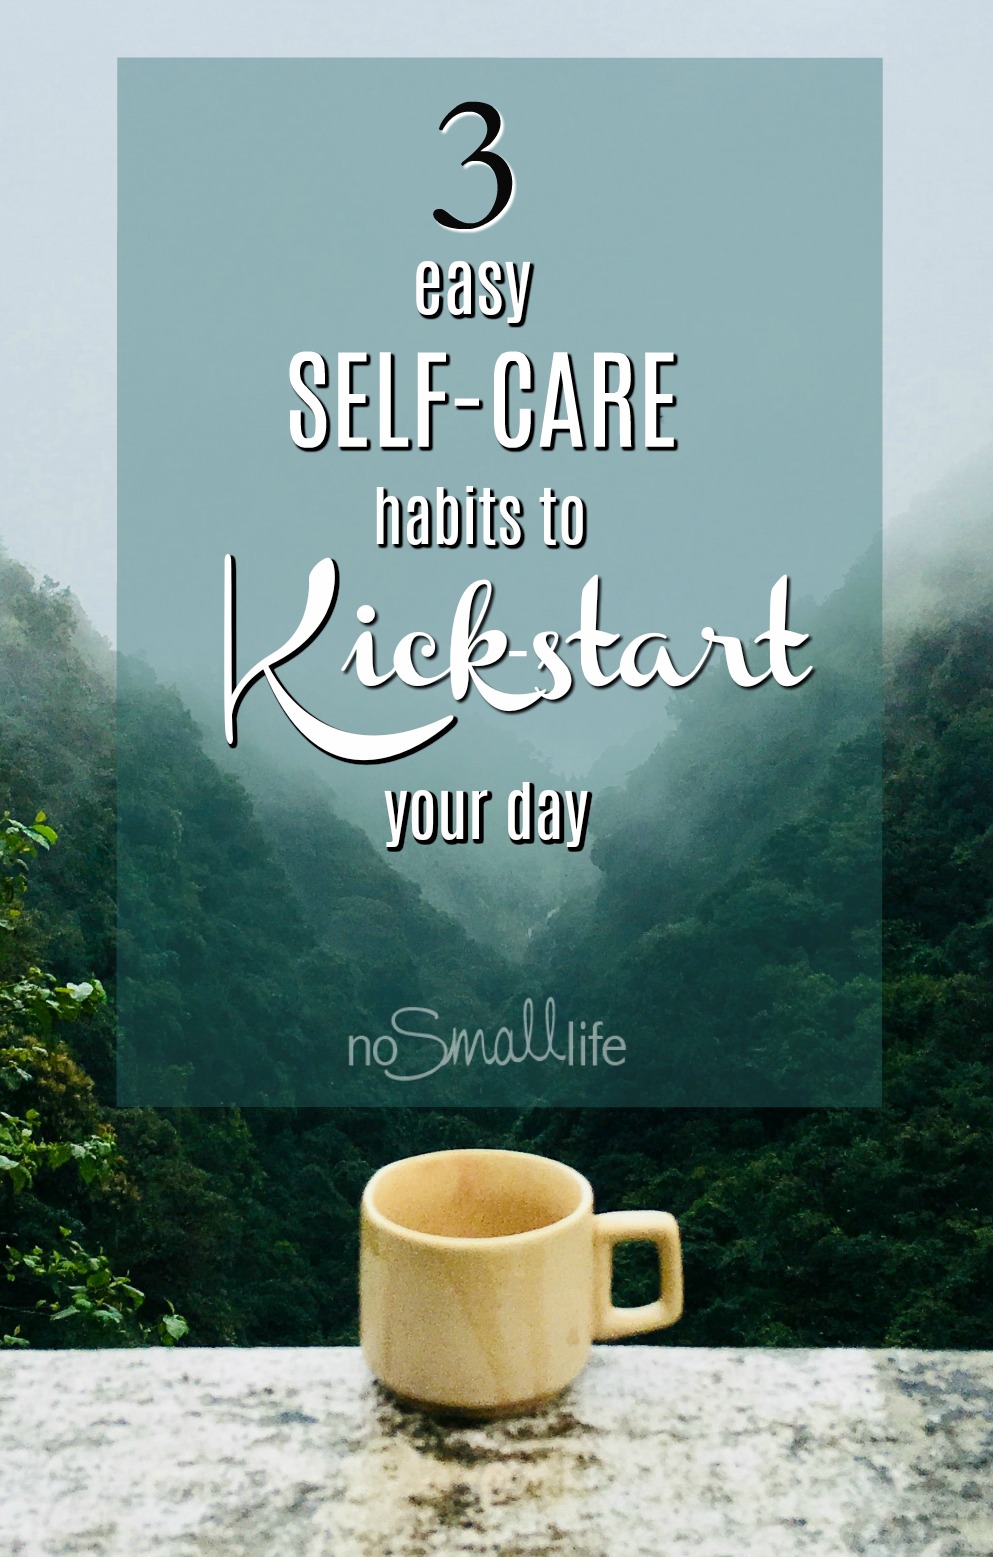 3 Easy Self-Care Habits to Kick off your day